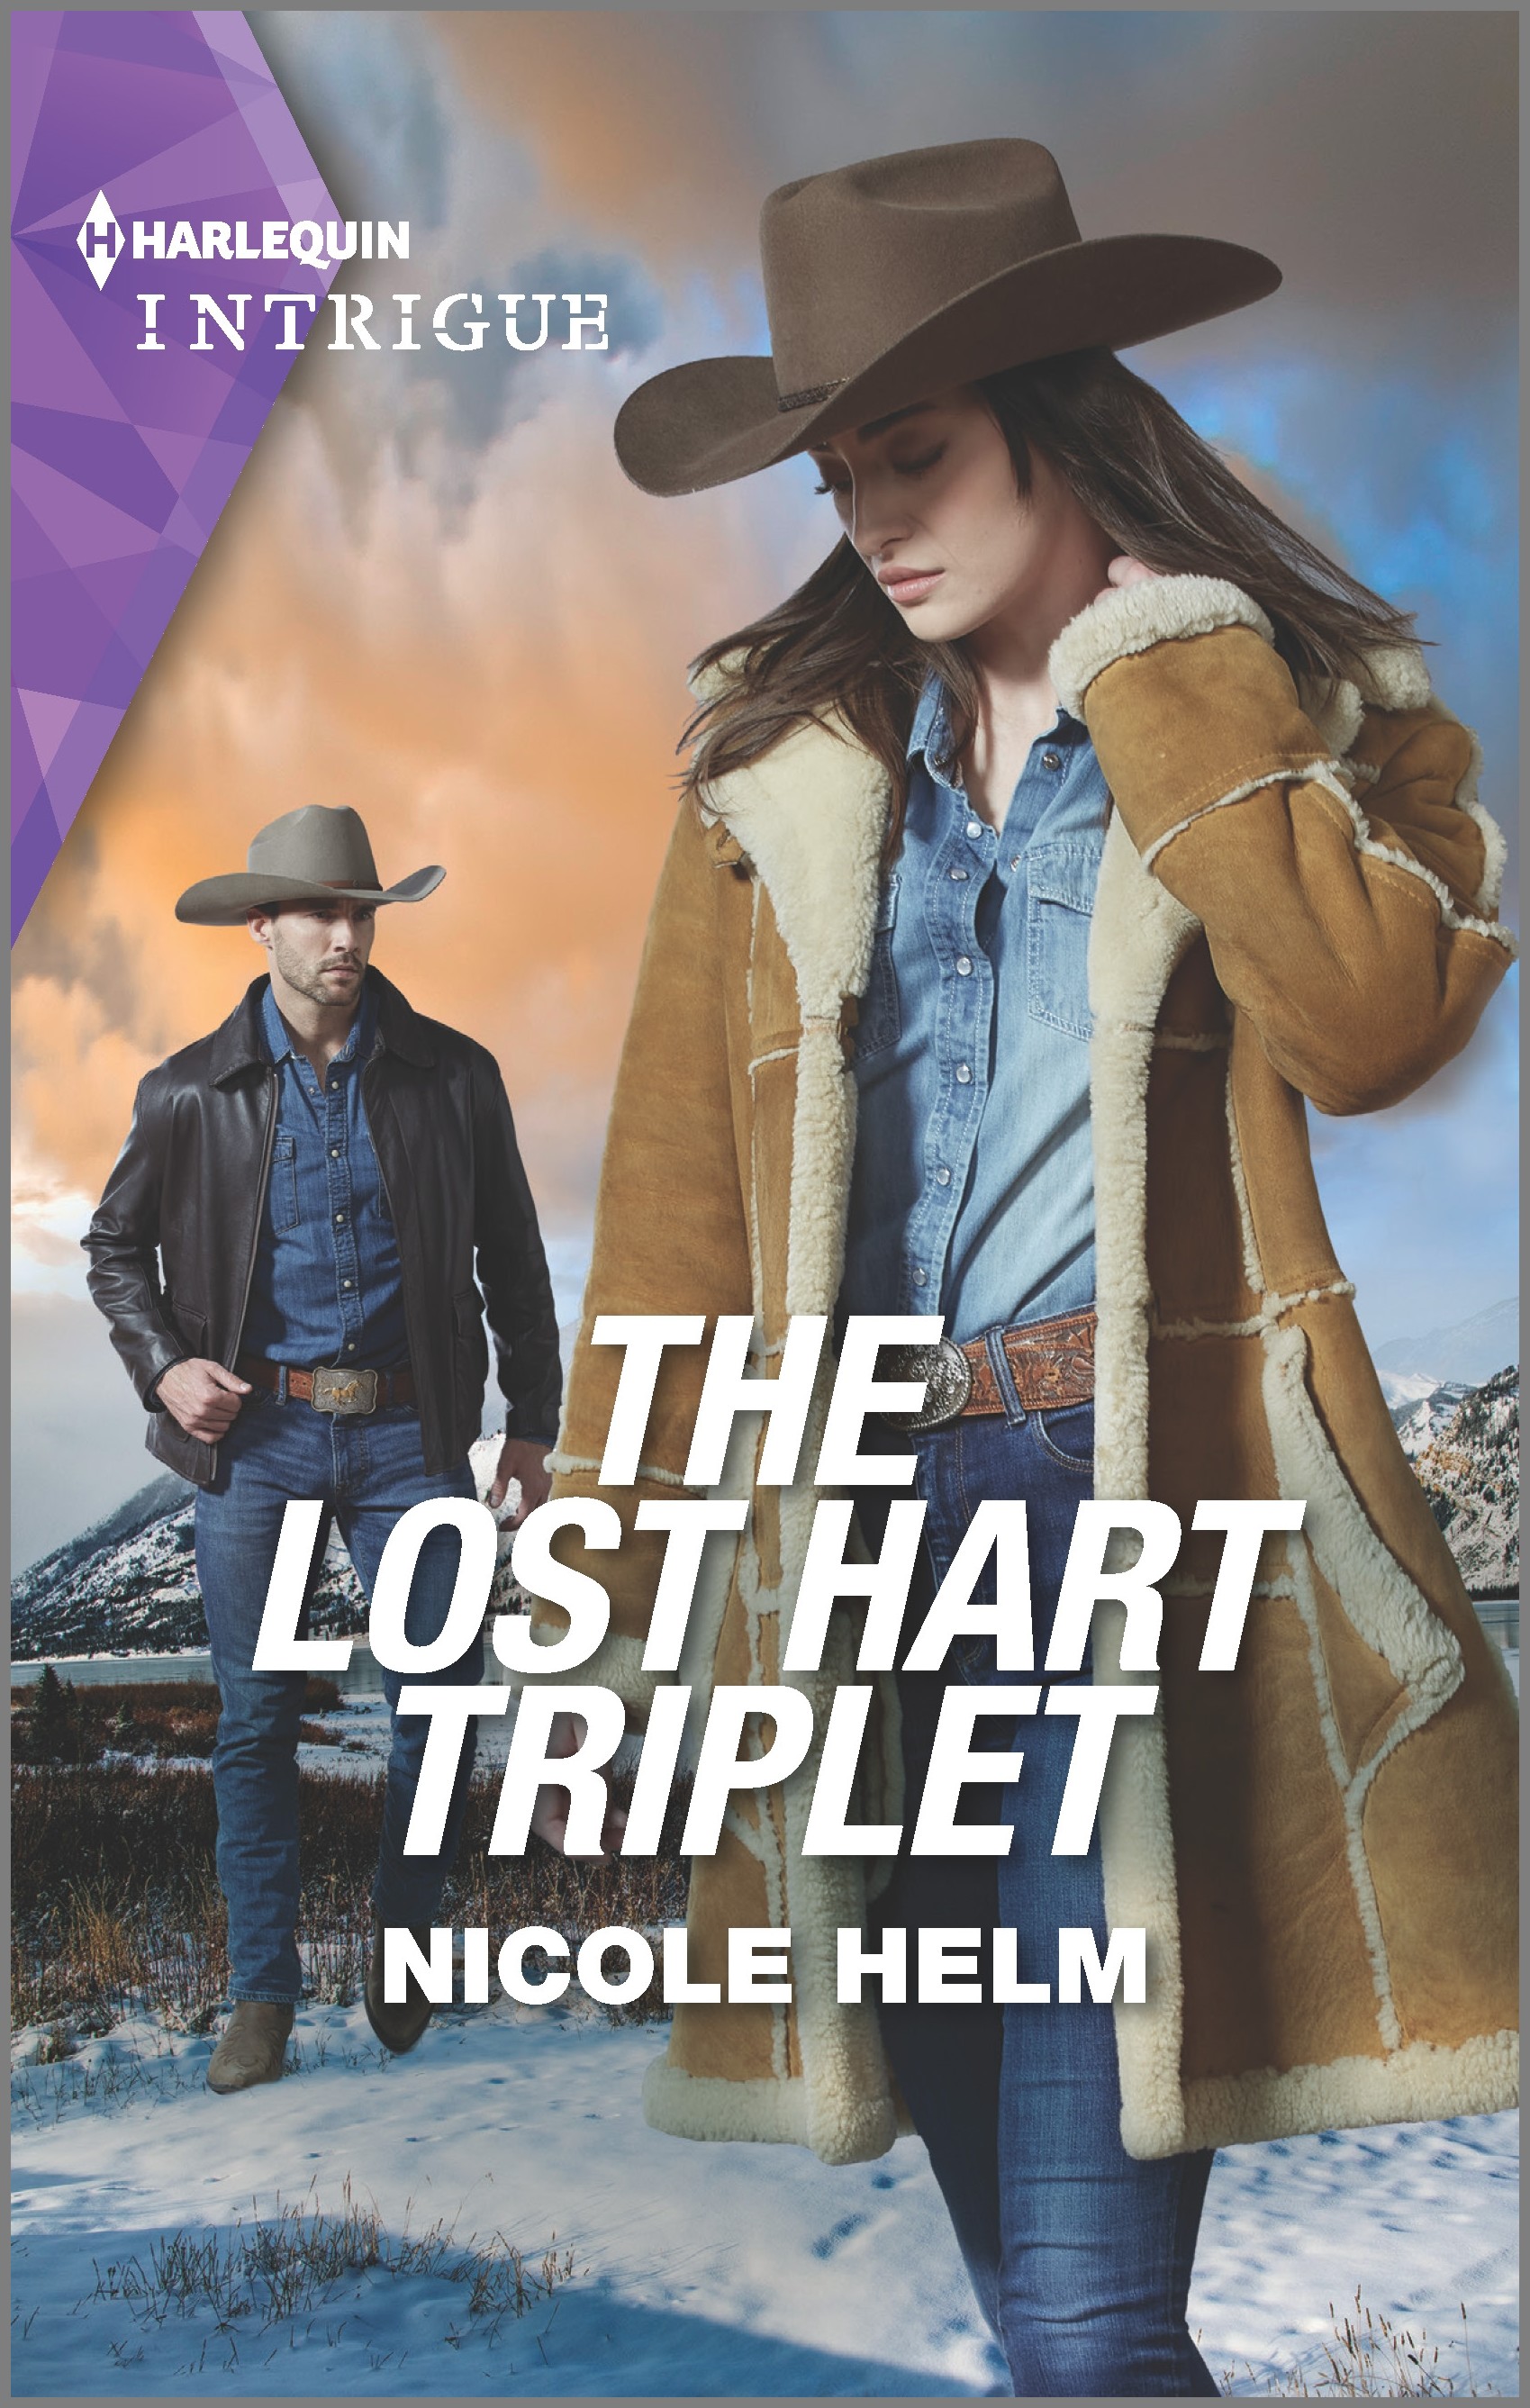 THE LOST HART TRIPLET by Nicole Helm